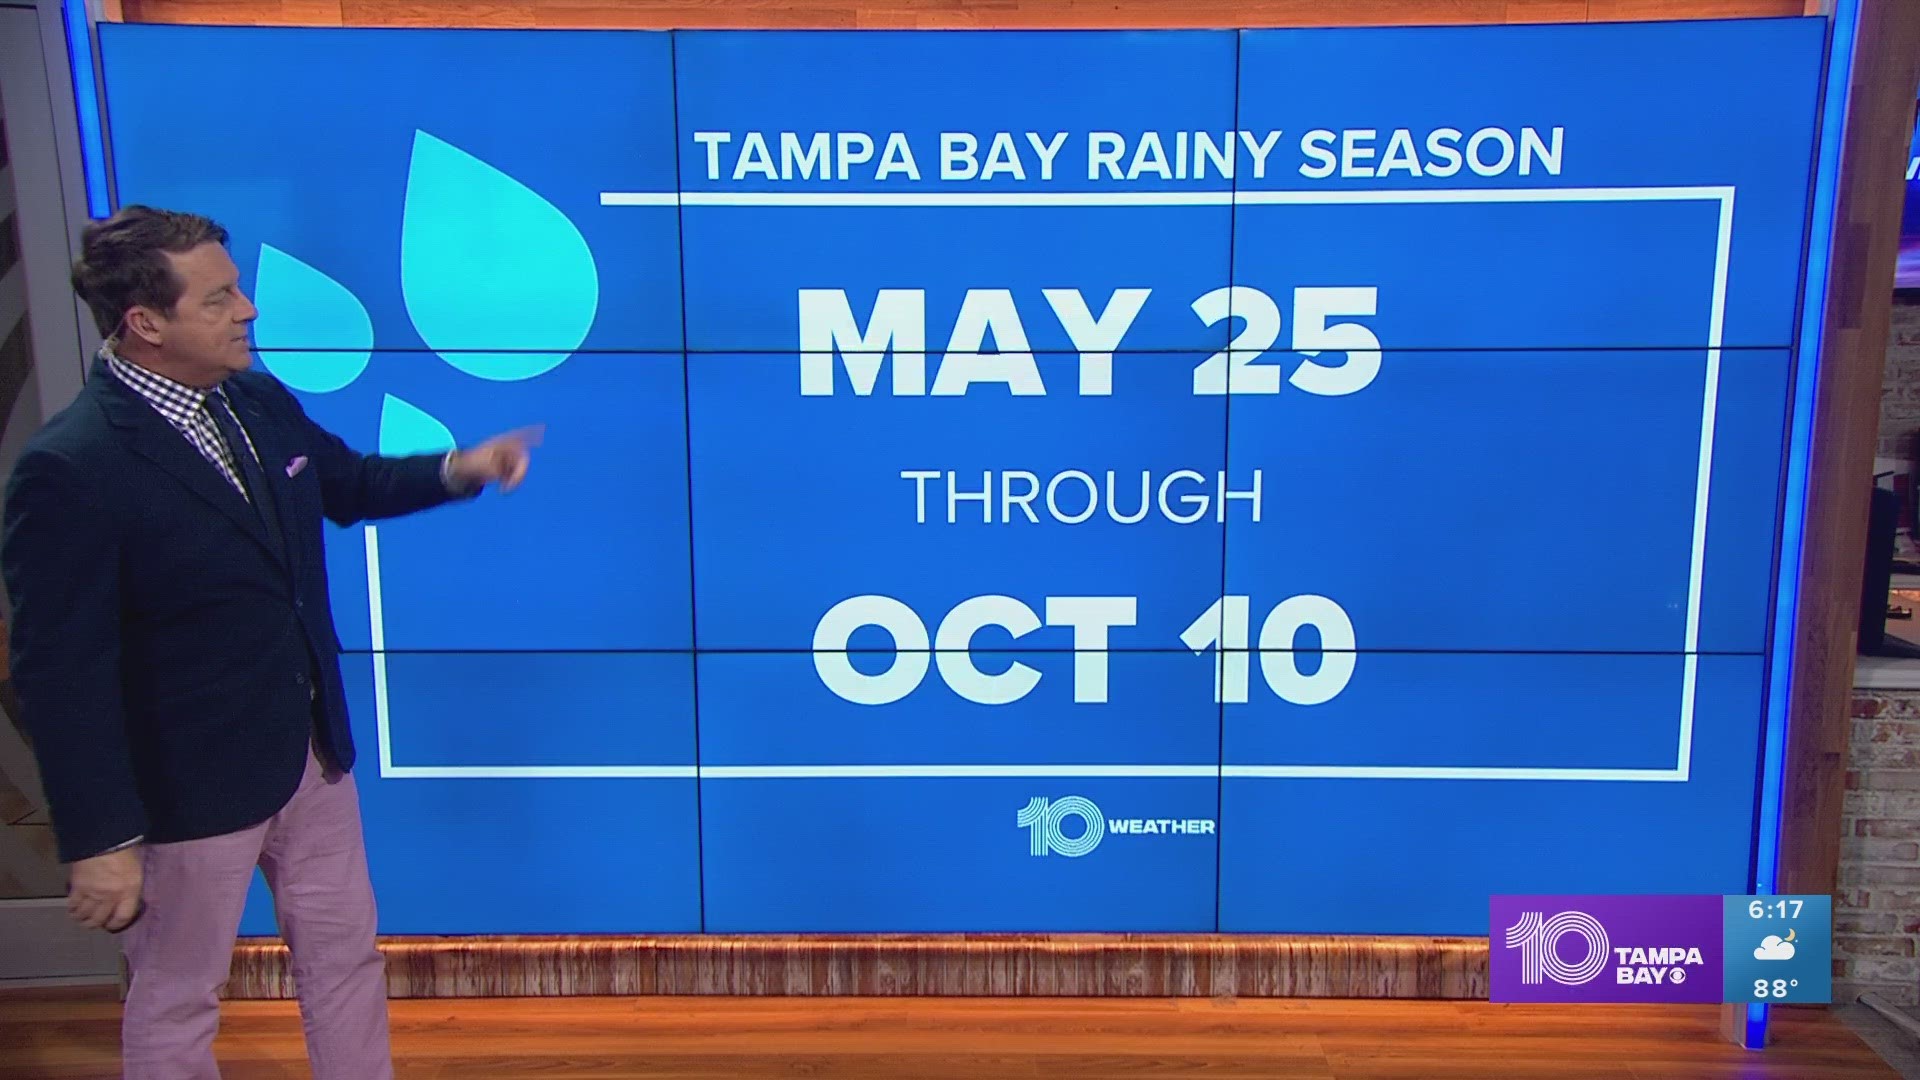 For much of west Central Florida, including the Tampa Bay area, the start of the rainy season begins on May 25 and lasts through Oct. 10.